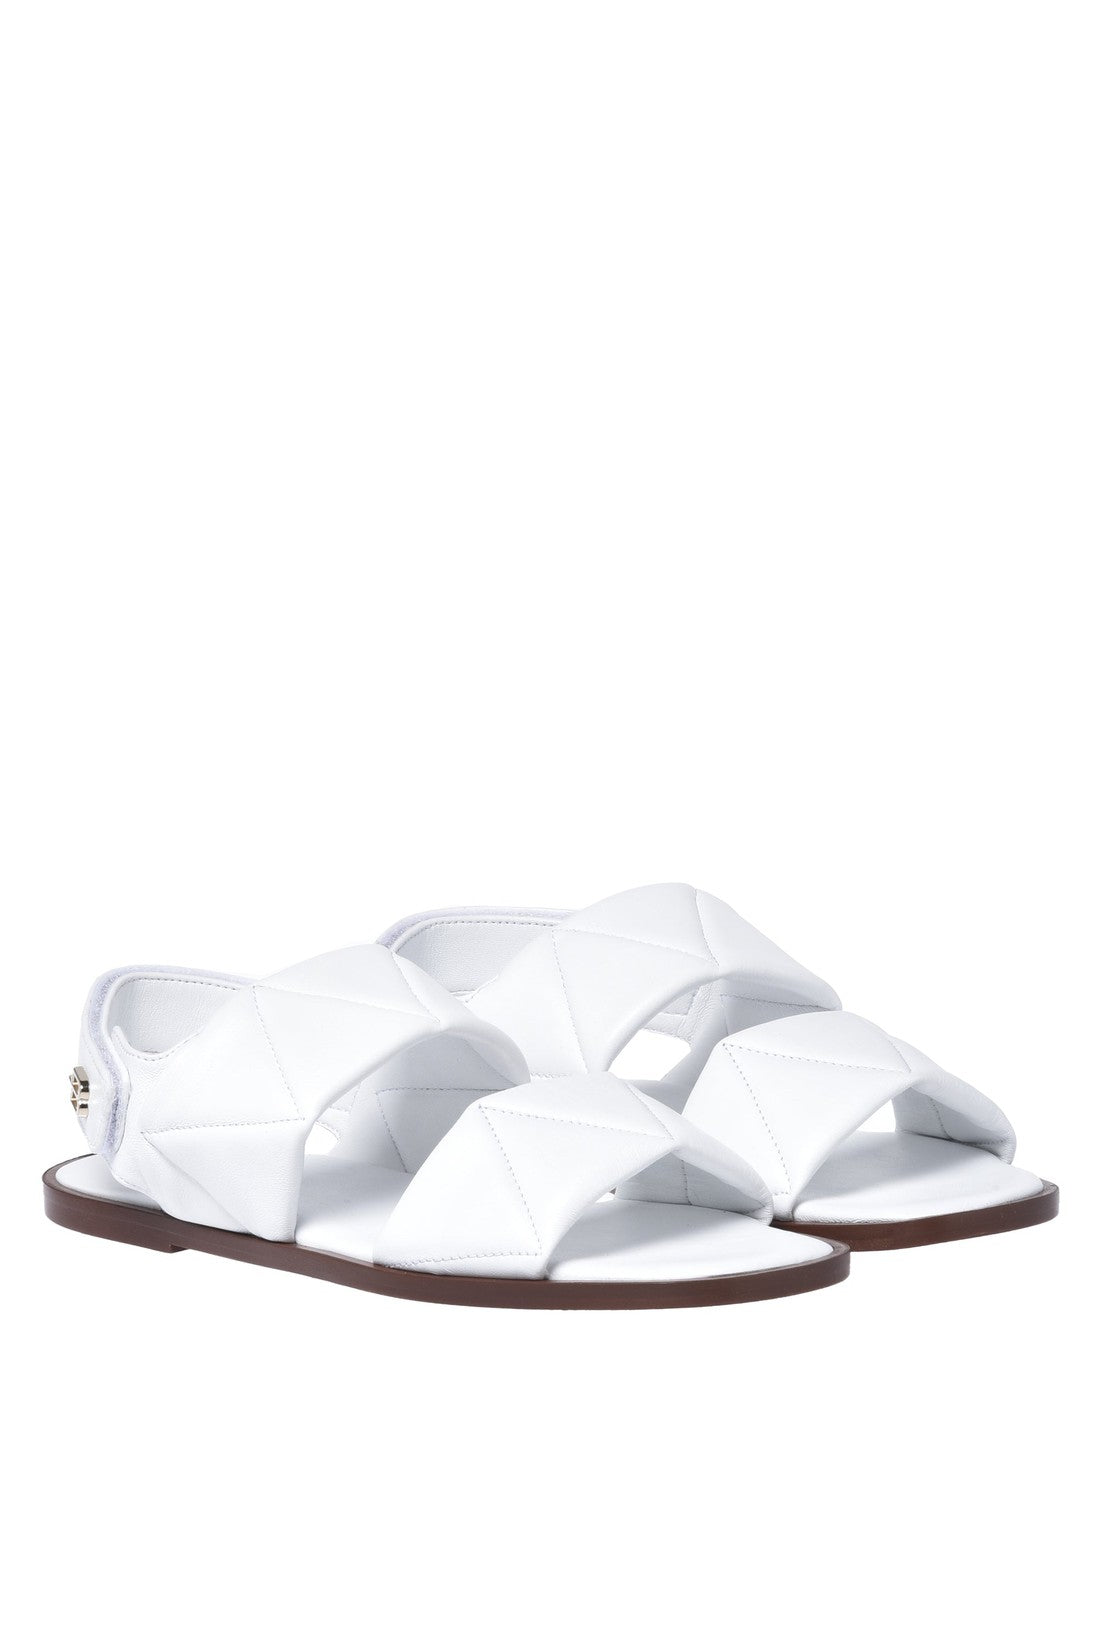 BALDININI-OUTLET-SALE-Sandal-in-white-quilted-leather-Sandalen-ARCHIVE-COLLECTION-3.jpg